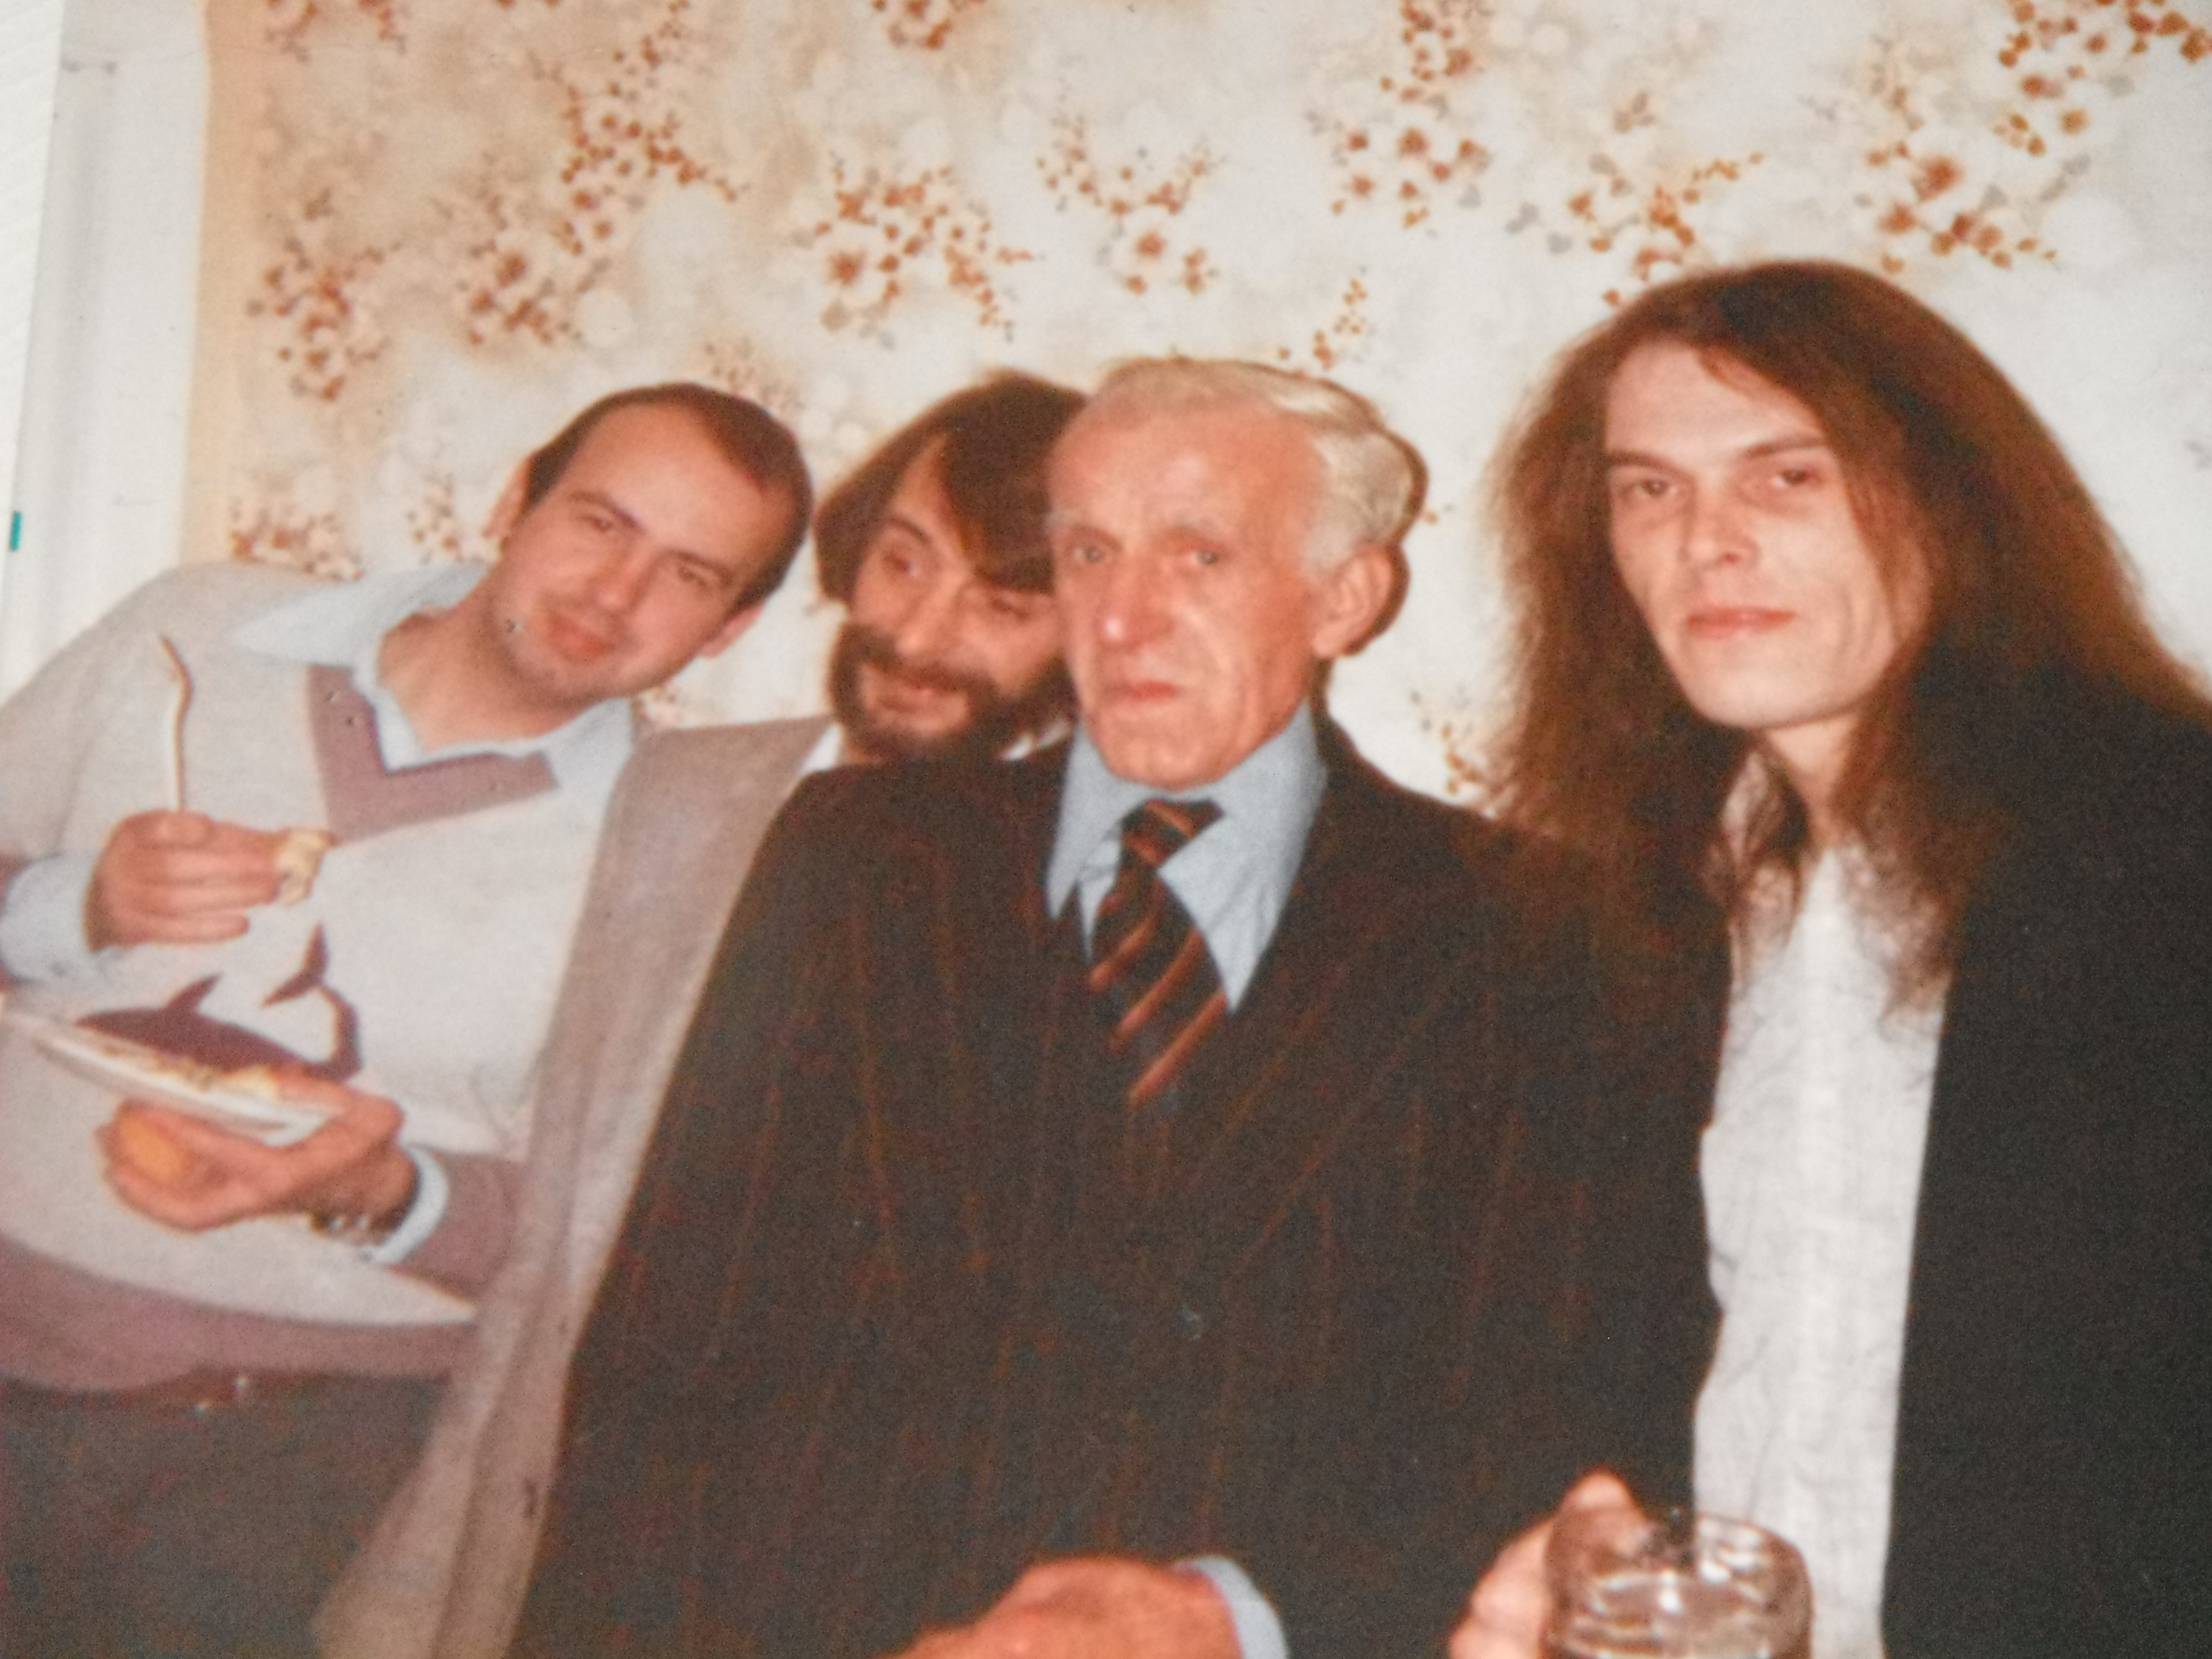 Photo tken by family - me (left)with my Mum's dad and two of my uncles, all except me now sadly deceased